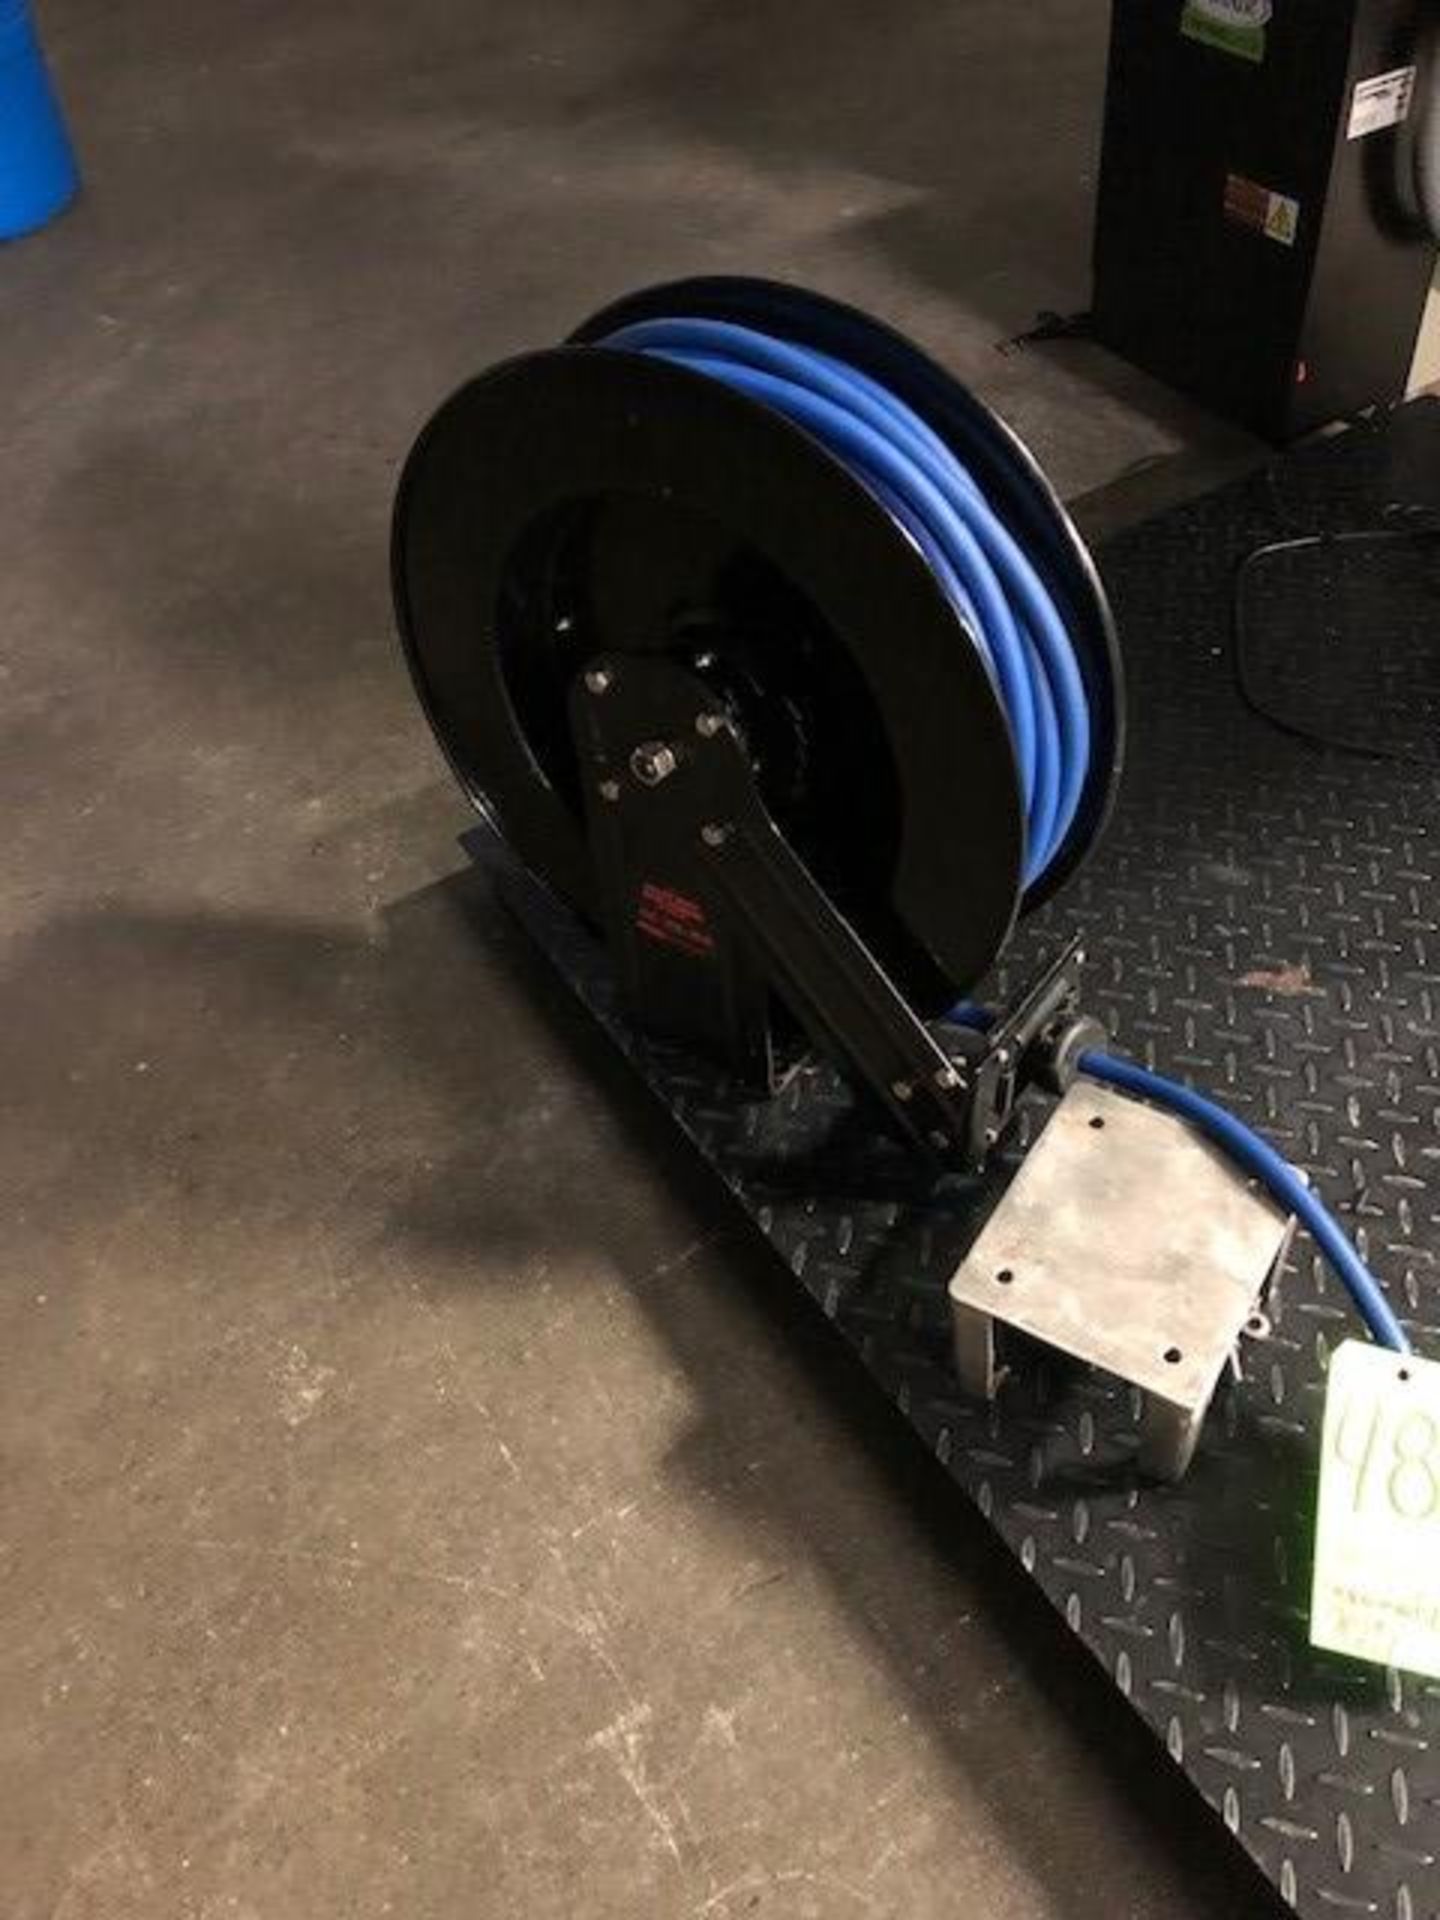 Heavy-Duty Auto Rewind Air Hose Reel, 75' in Length, 3/8" Hose Dia., 300 Working PSI (LOCATED IN